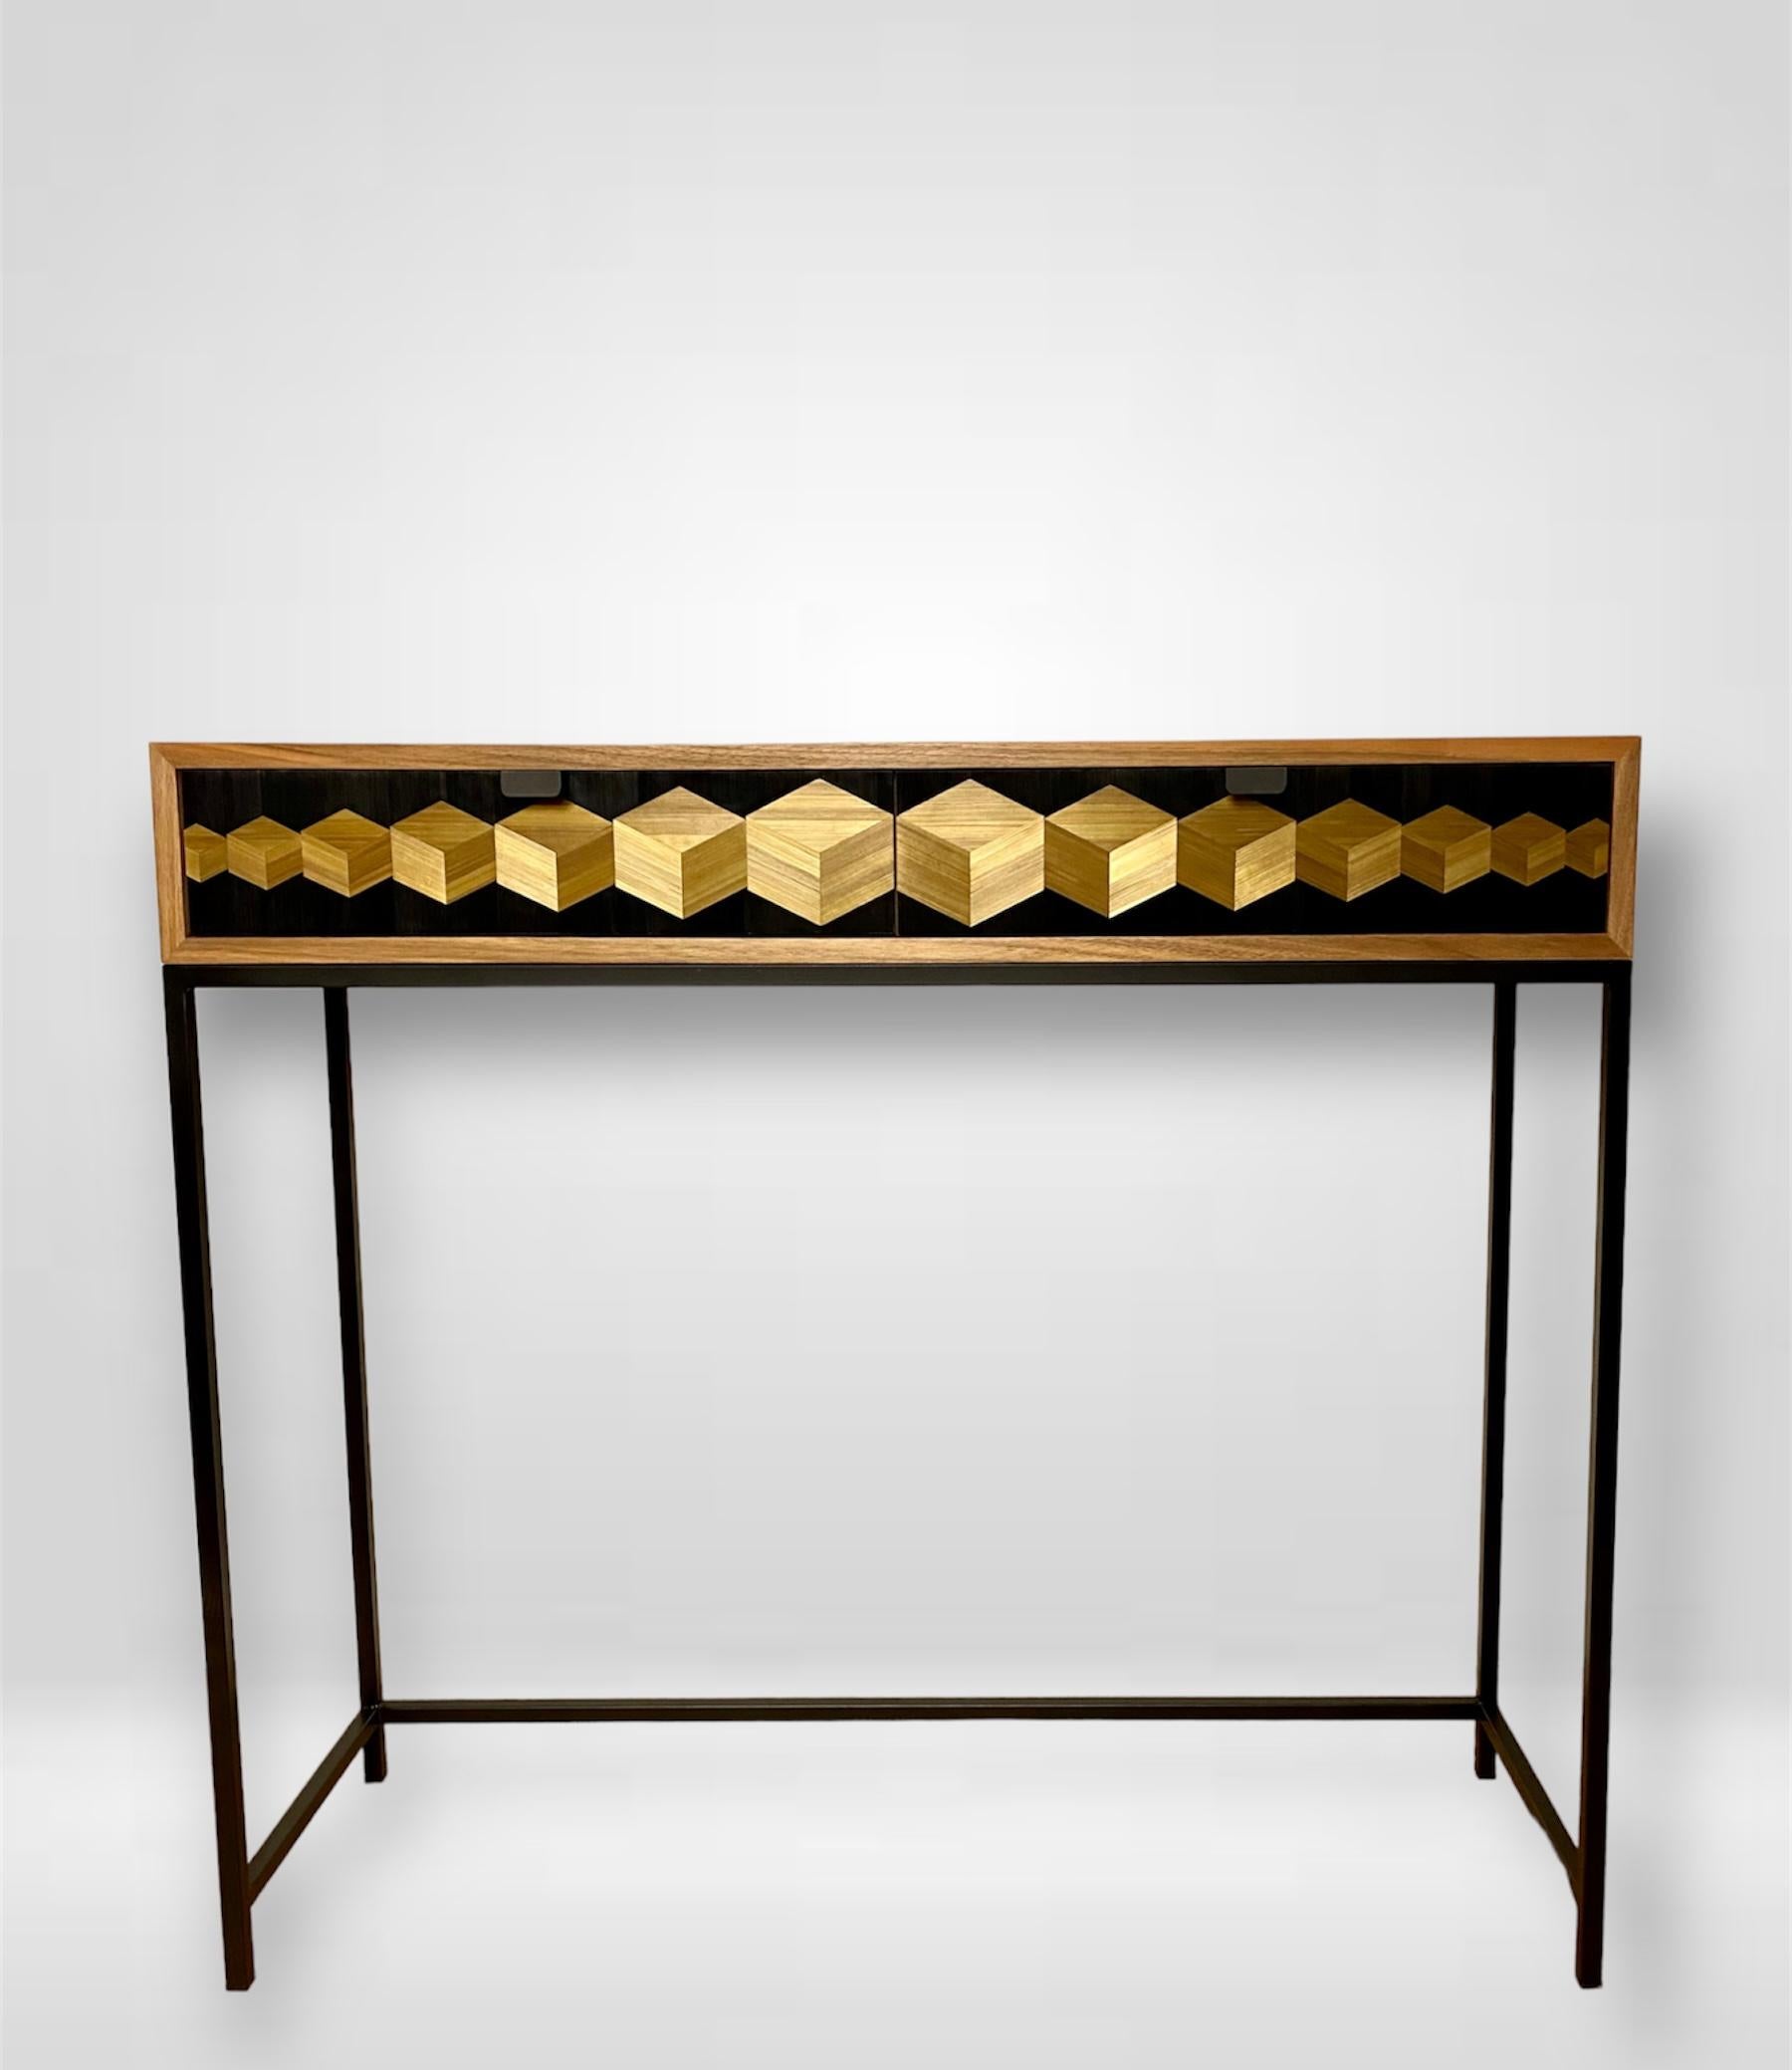 This console is elegant and functional.
It is ideal in an entrance hall, in your living room or even in a bedroom or office. It offers two beautiful storage spaces thanks to its fully-extending drawers mounted on invisible runners with shock